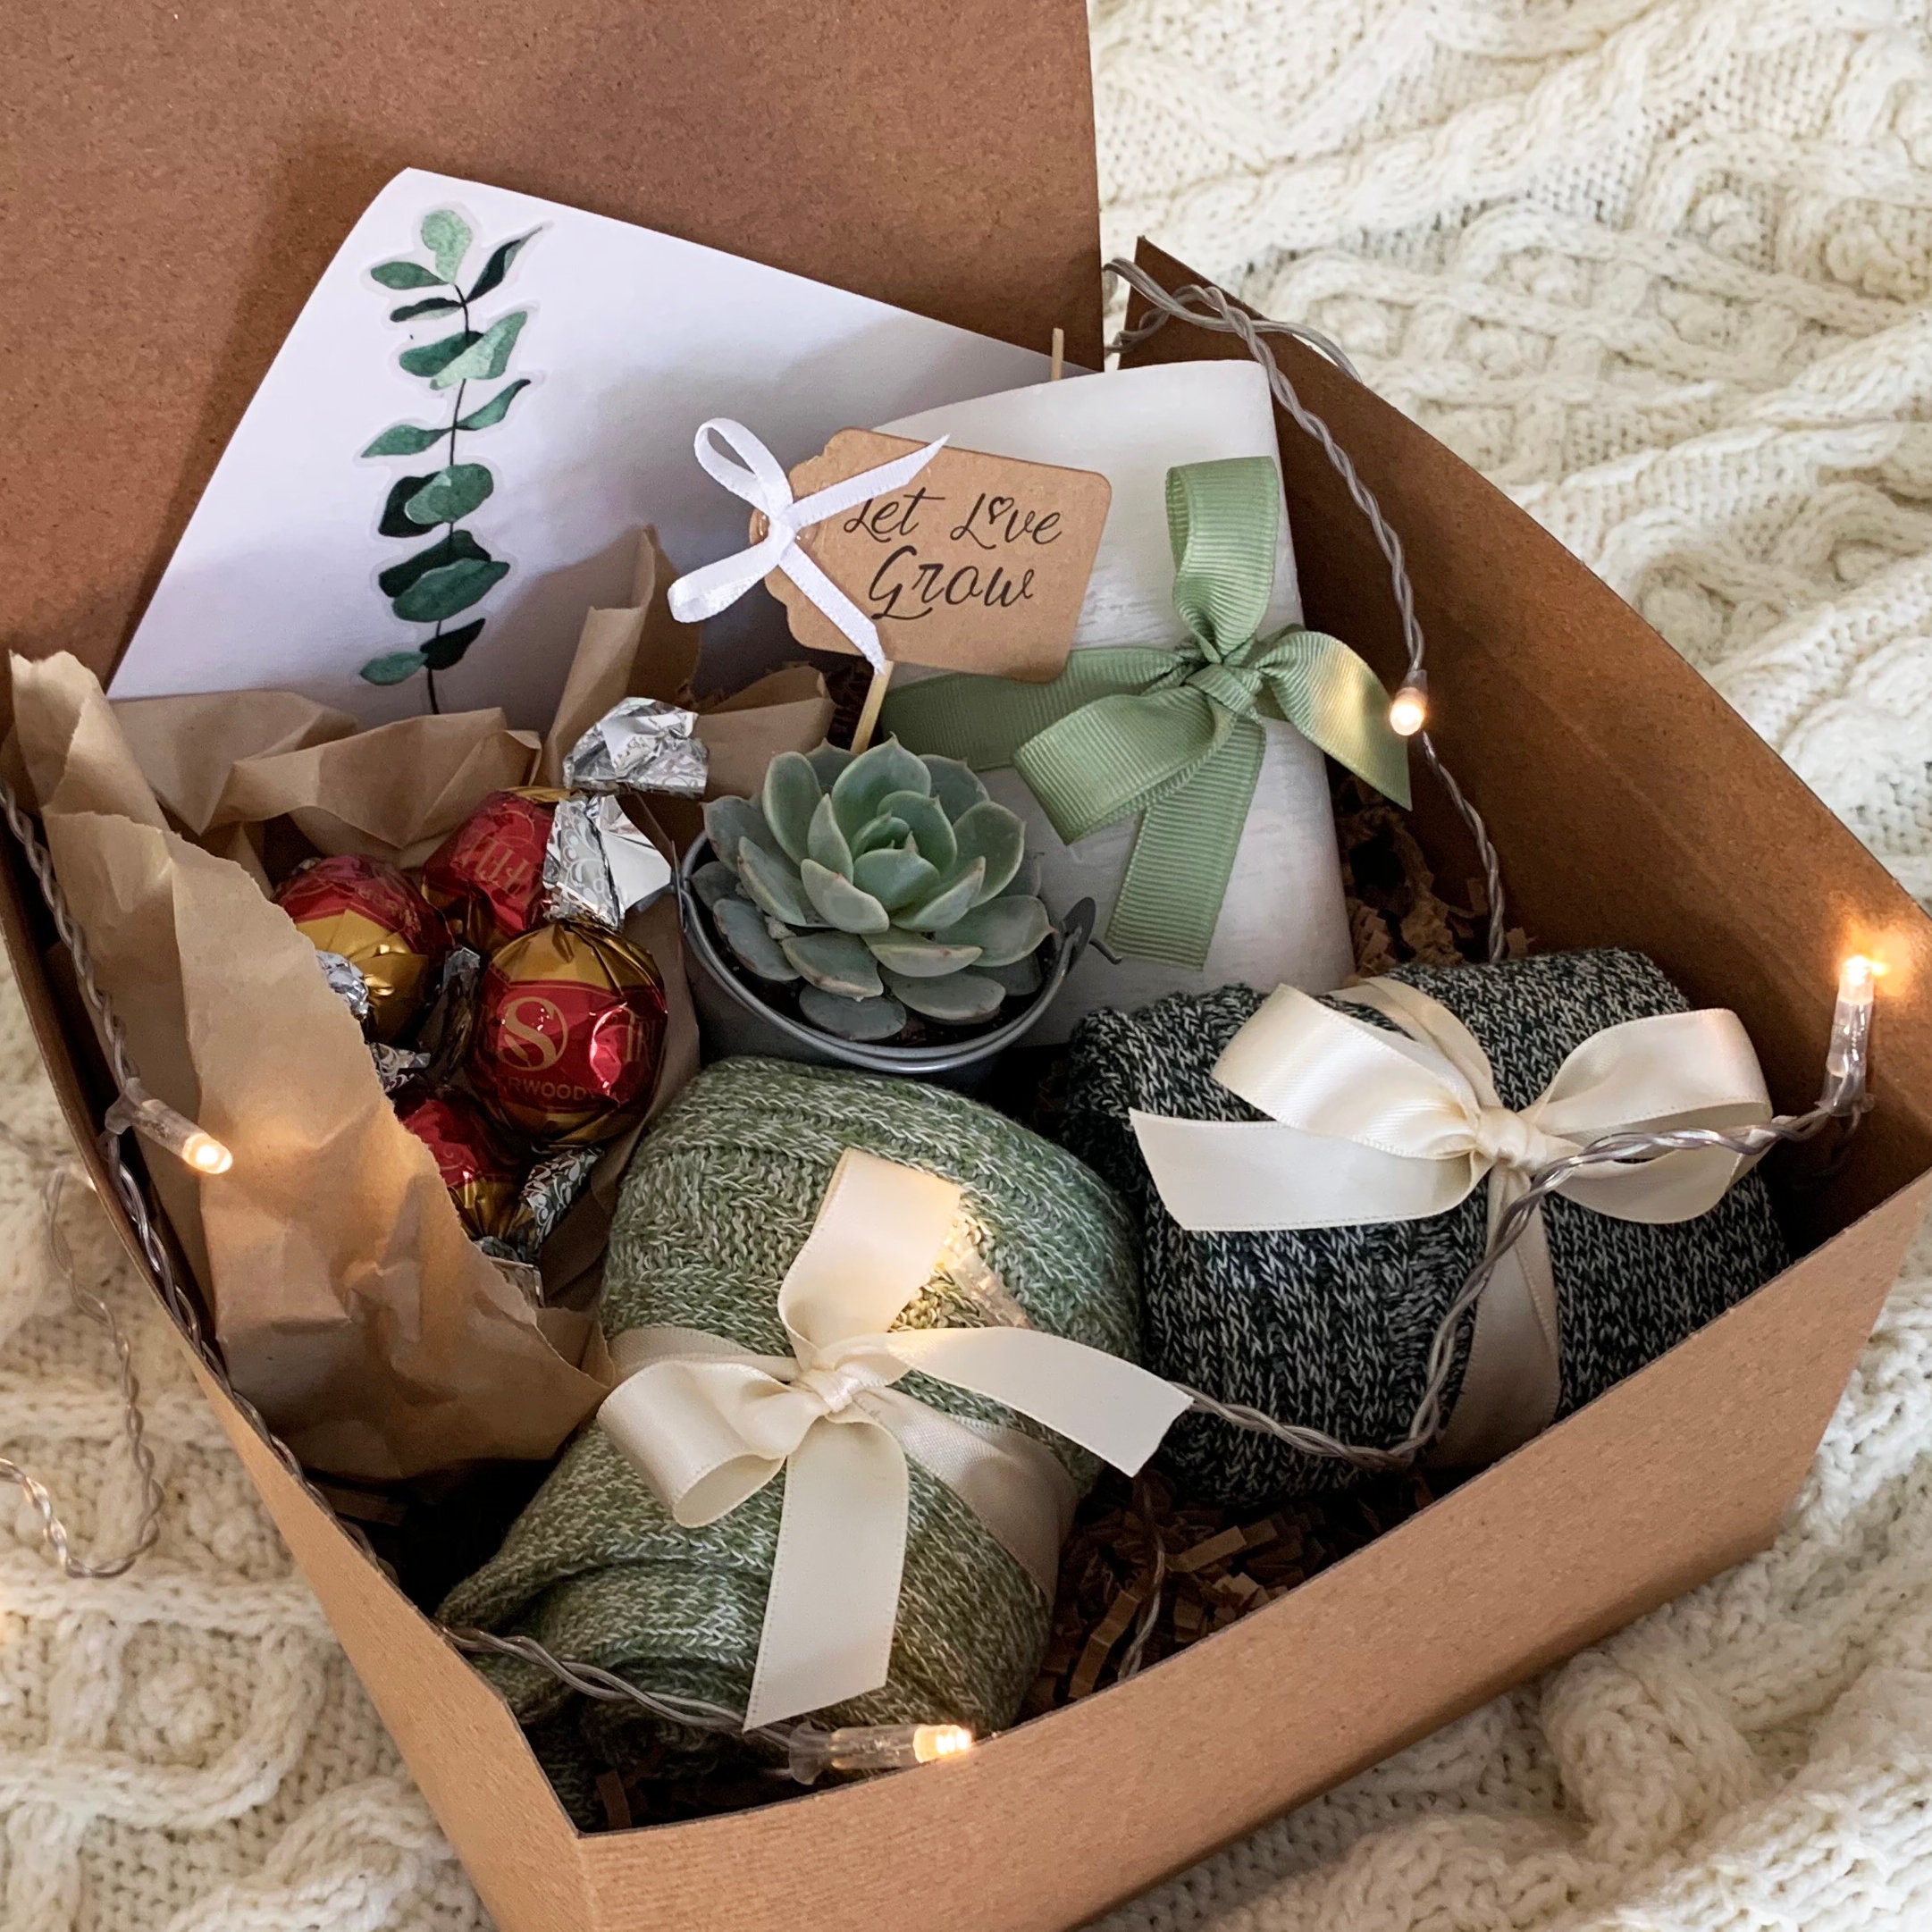 Christmas Gifts for Women, Birthday Gifts Basket for Friends Gifts for Her  Girlfriend Sister Mom Unique Holiday Gifts Box Jade Roller Bath Bombs